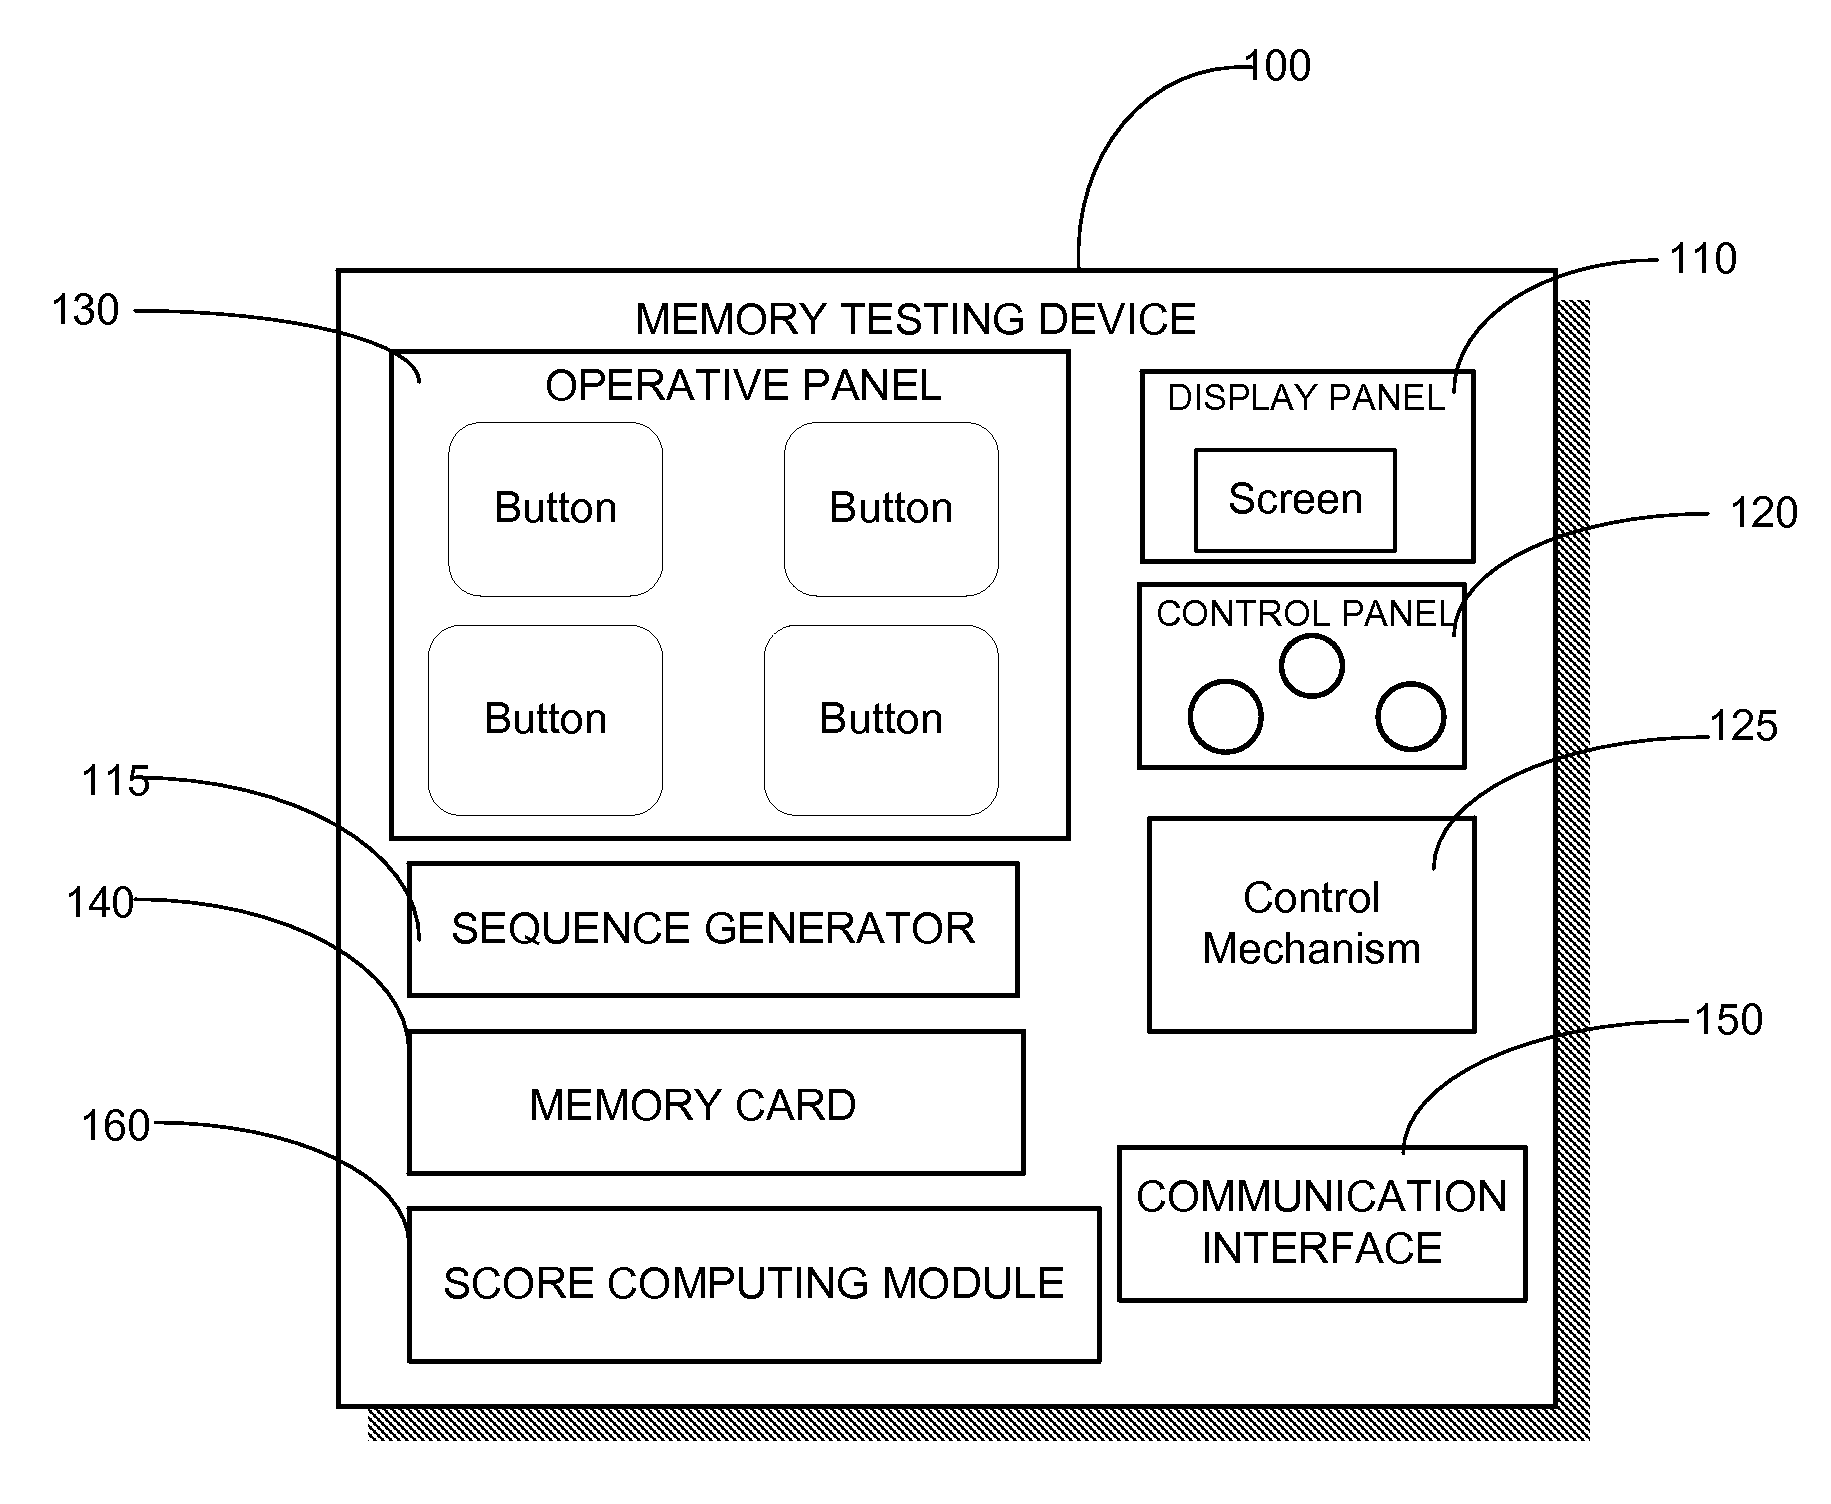 Apparatus and System for Testing Memory